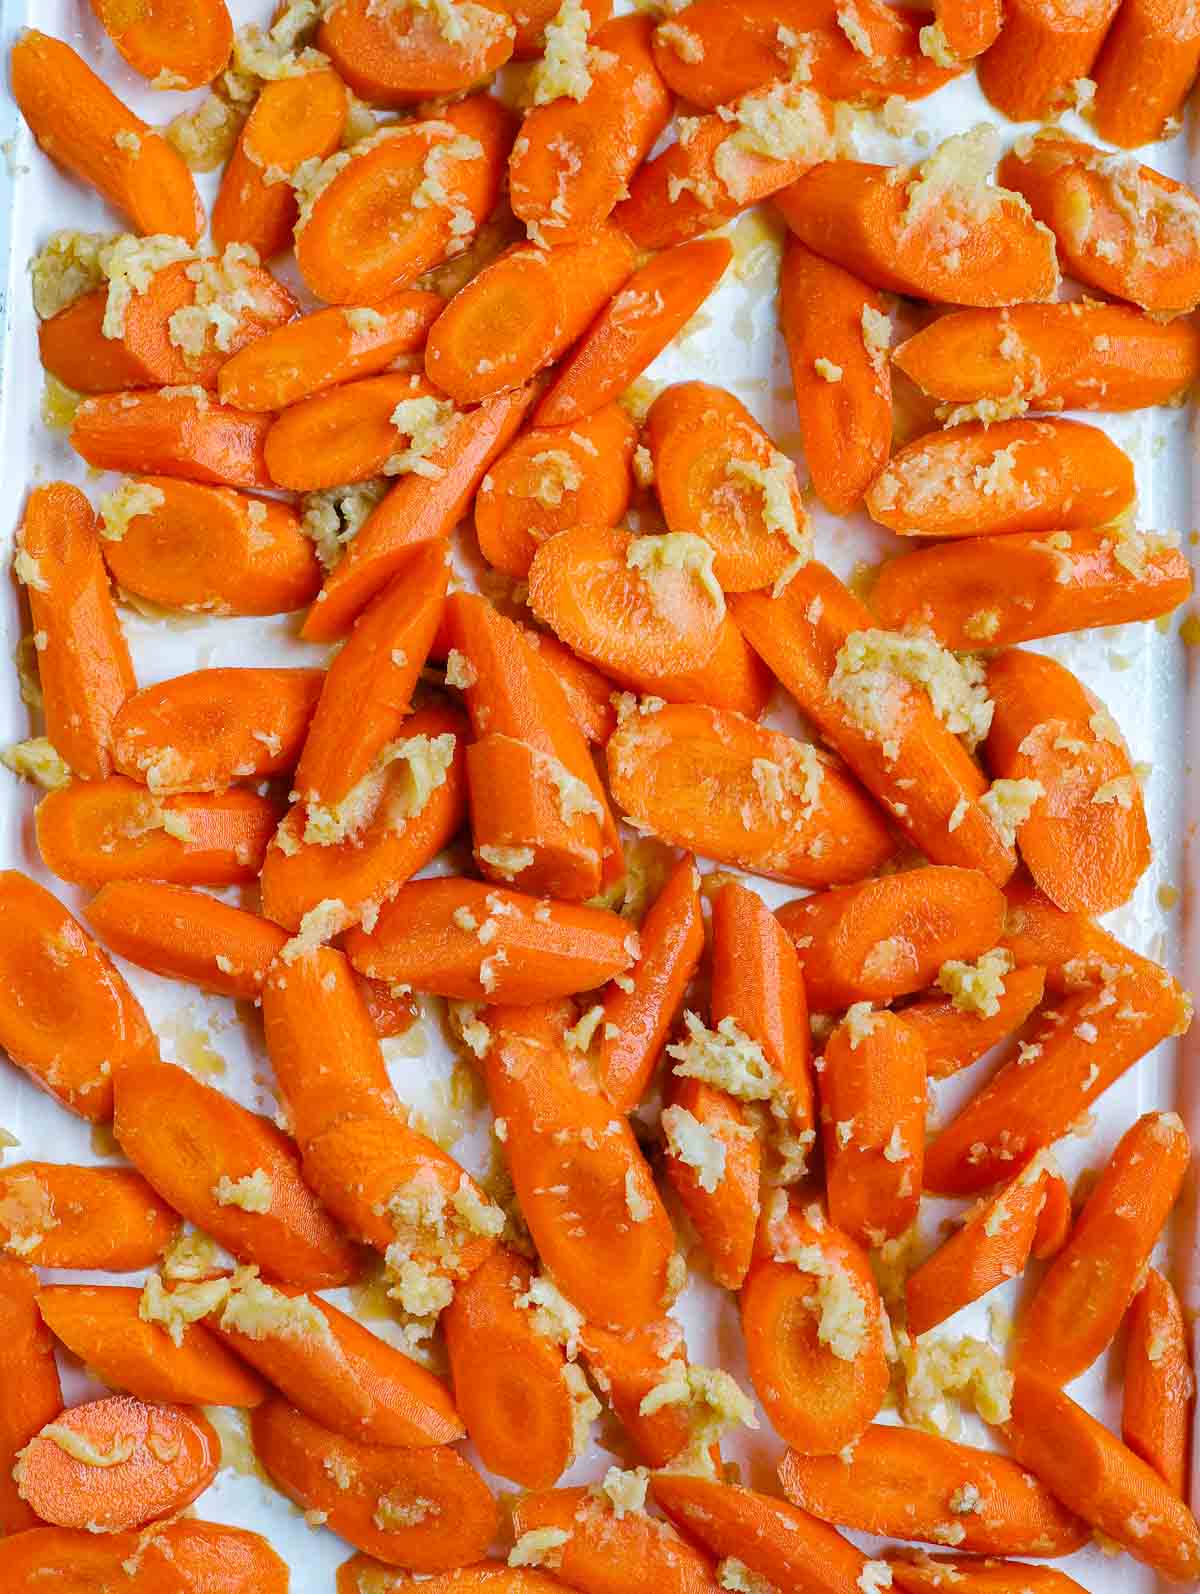 uncooked brown sugar glazed carrots on sheet pan